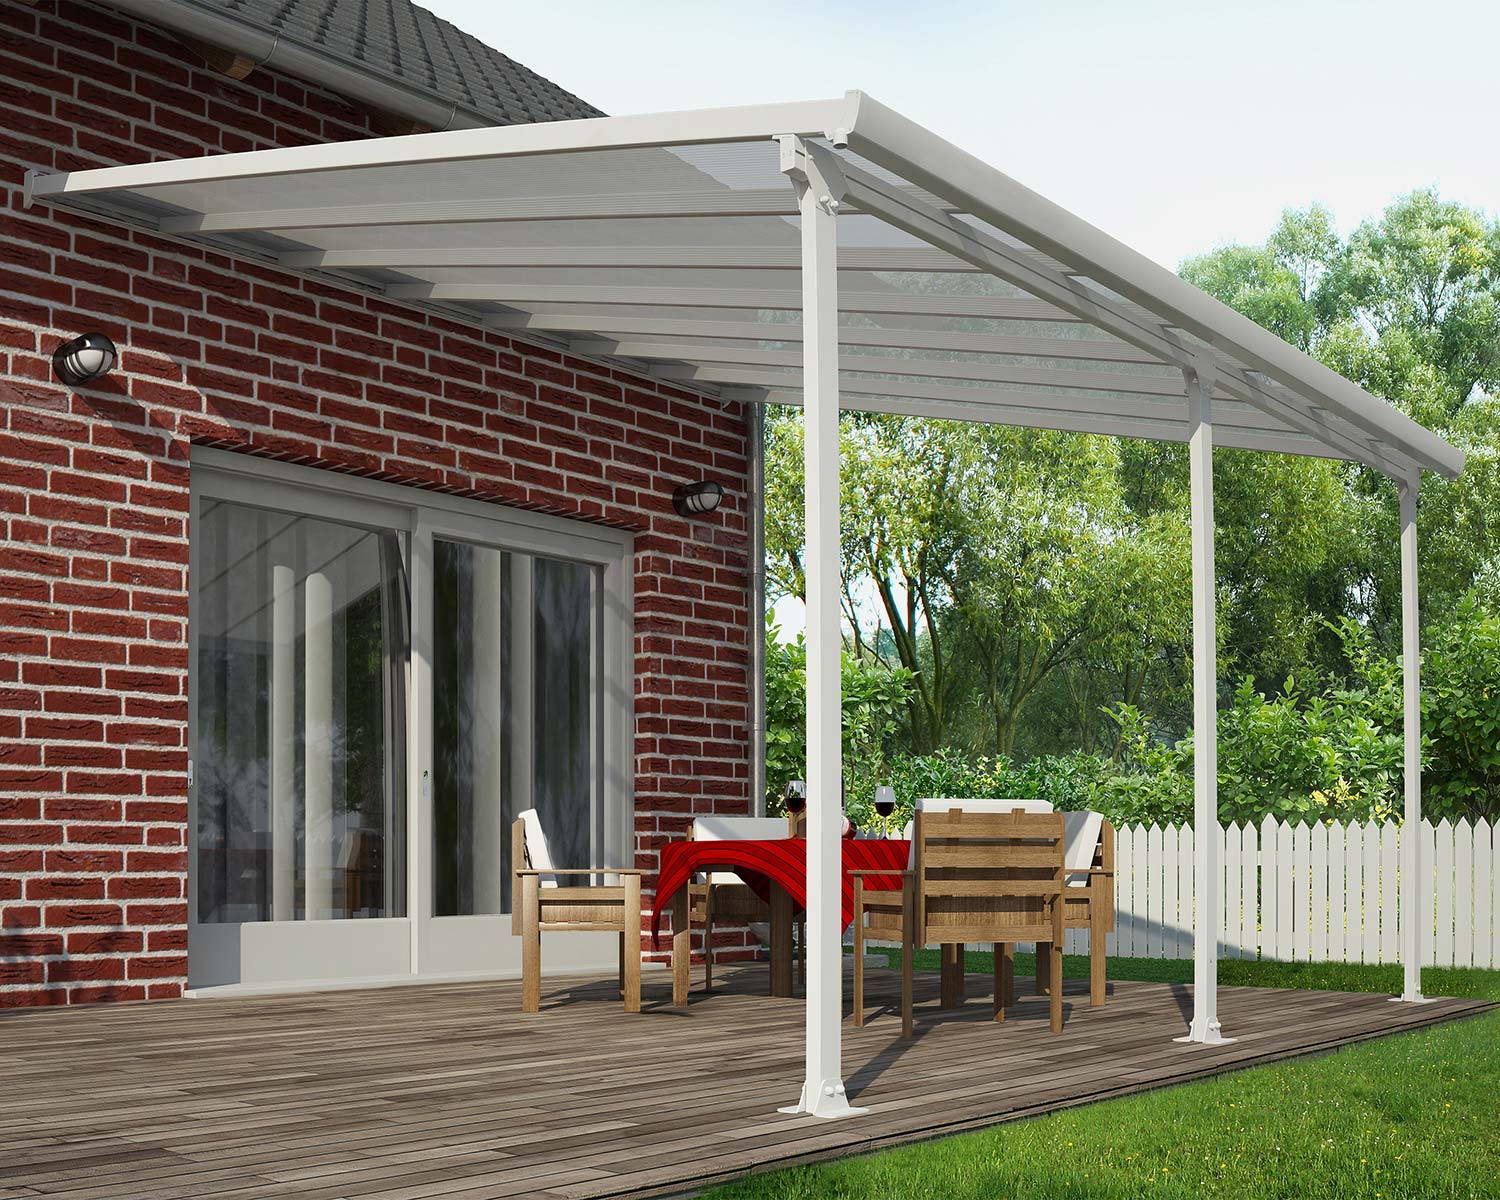 Aluminium White Patio Cover 13 x 14 feet attached to house Covers garden furniture on deck patio